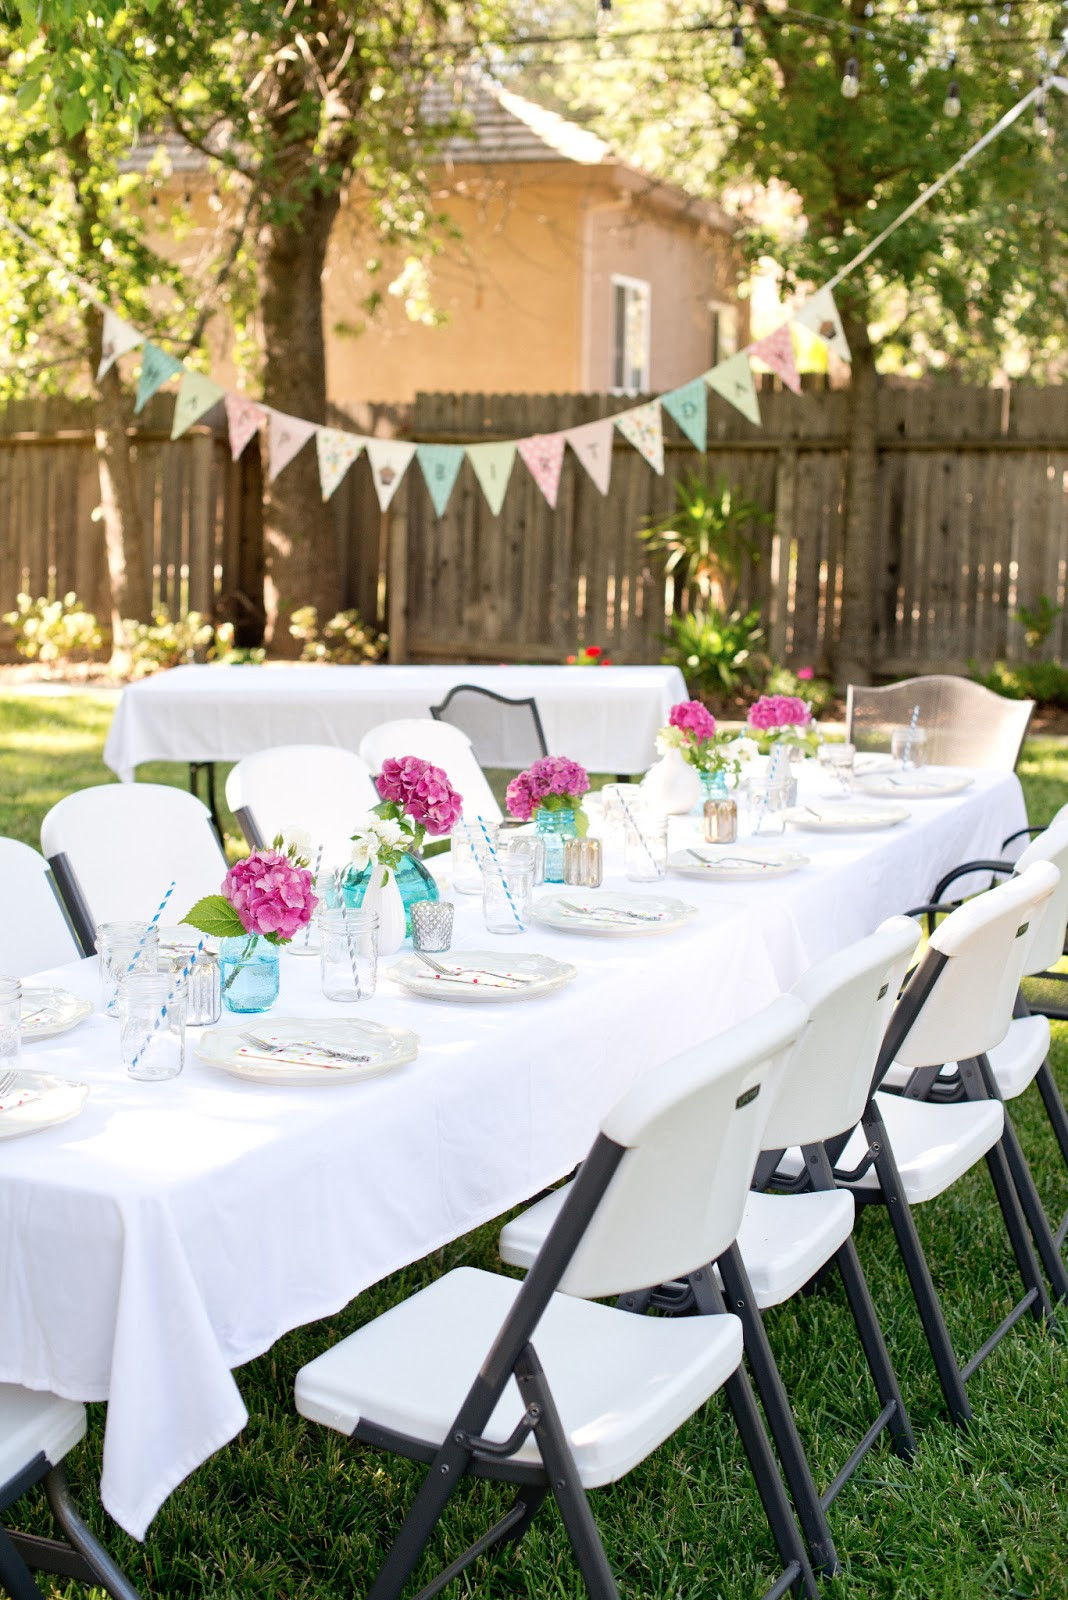 Backyard Party Decoration Ideas
 Backyard Party Decorations For Unfor table Moments